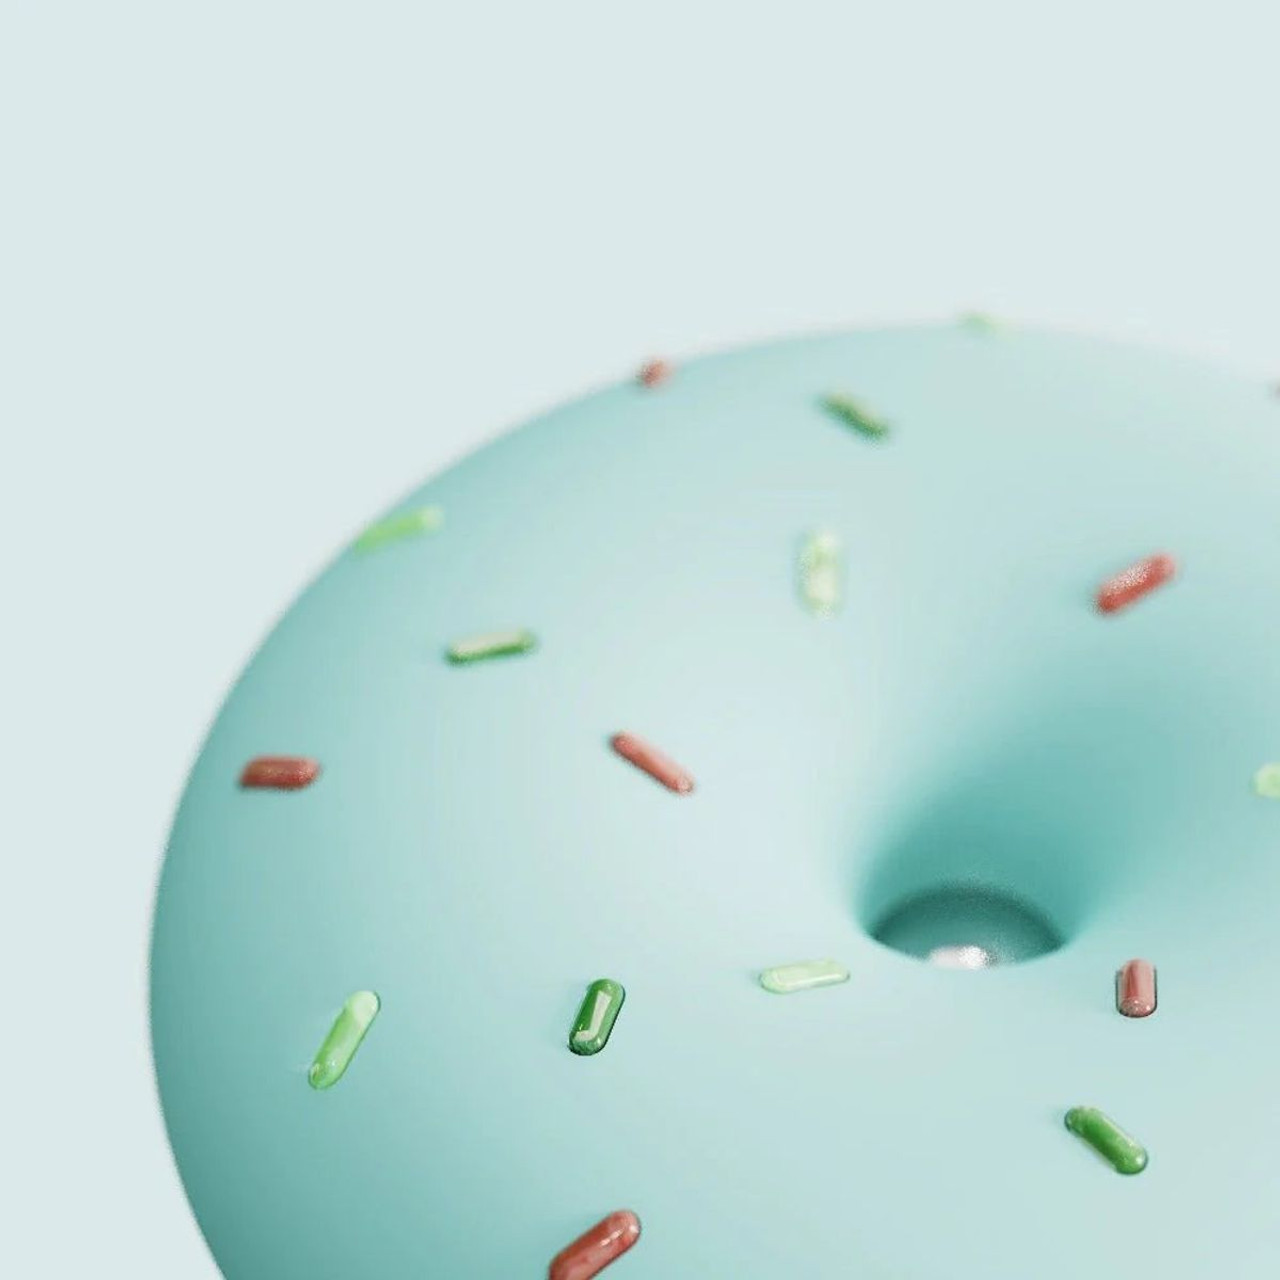 Cute Donut Humidifier product image